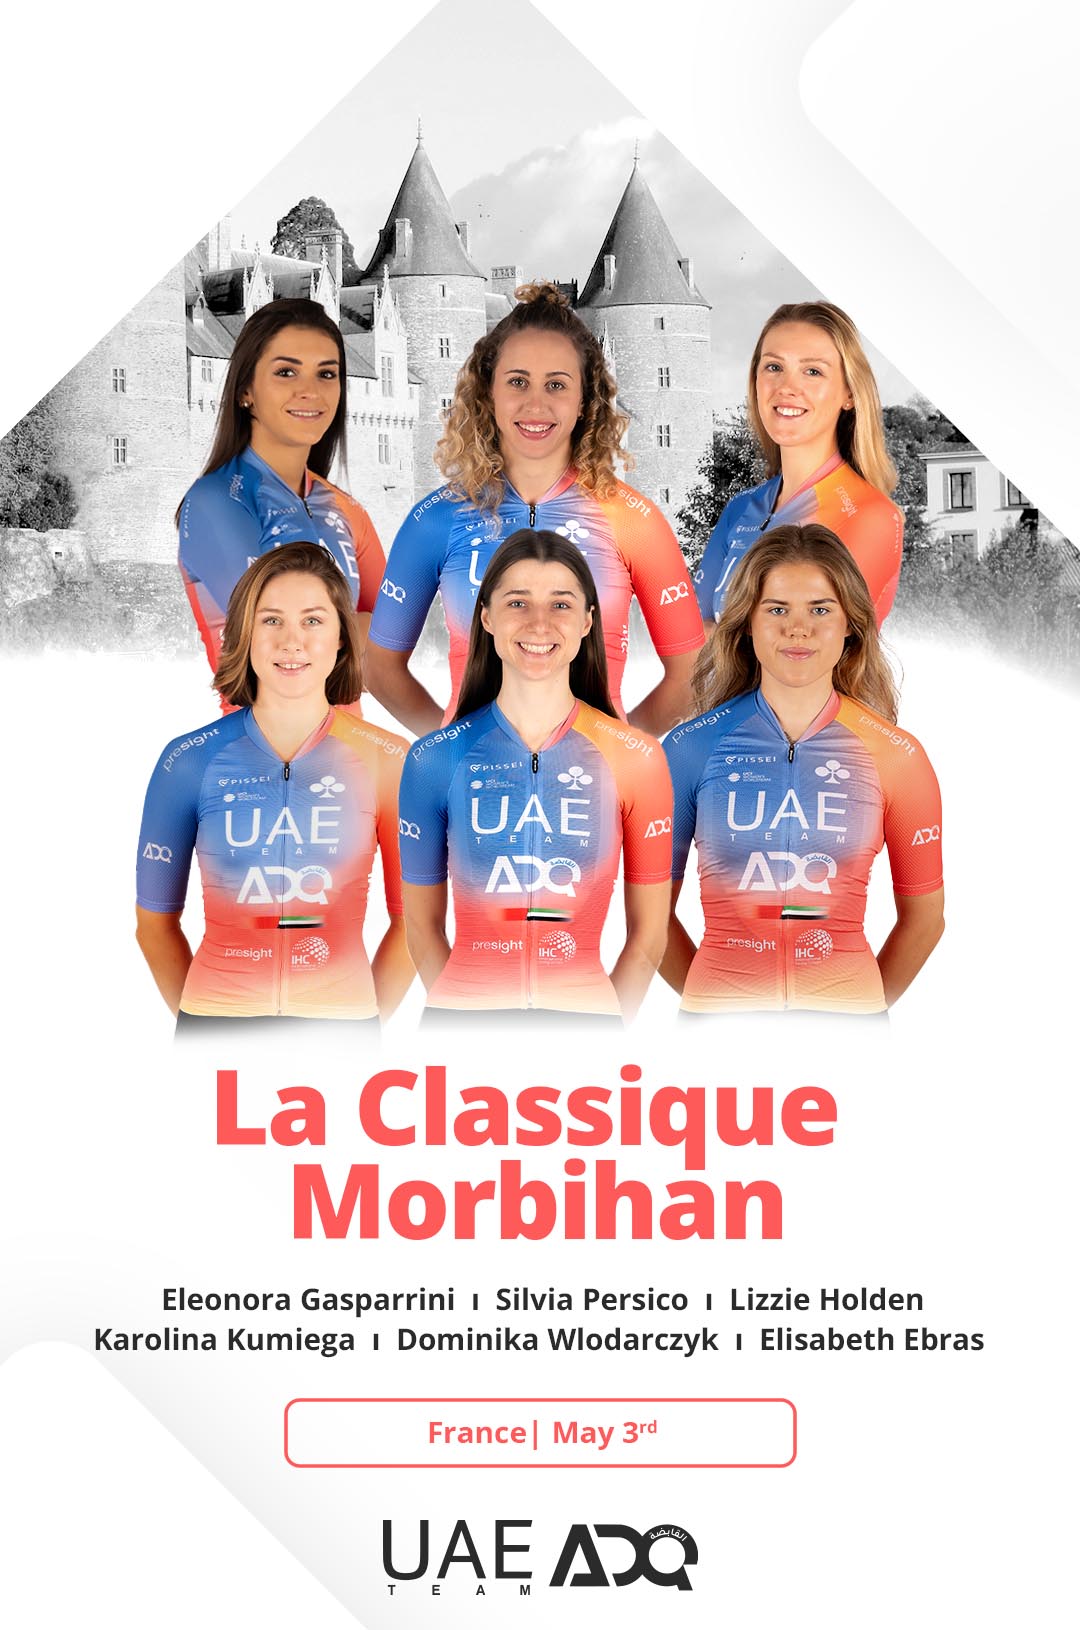 uae-team-adq-for-the-two-races-in-morbihan